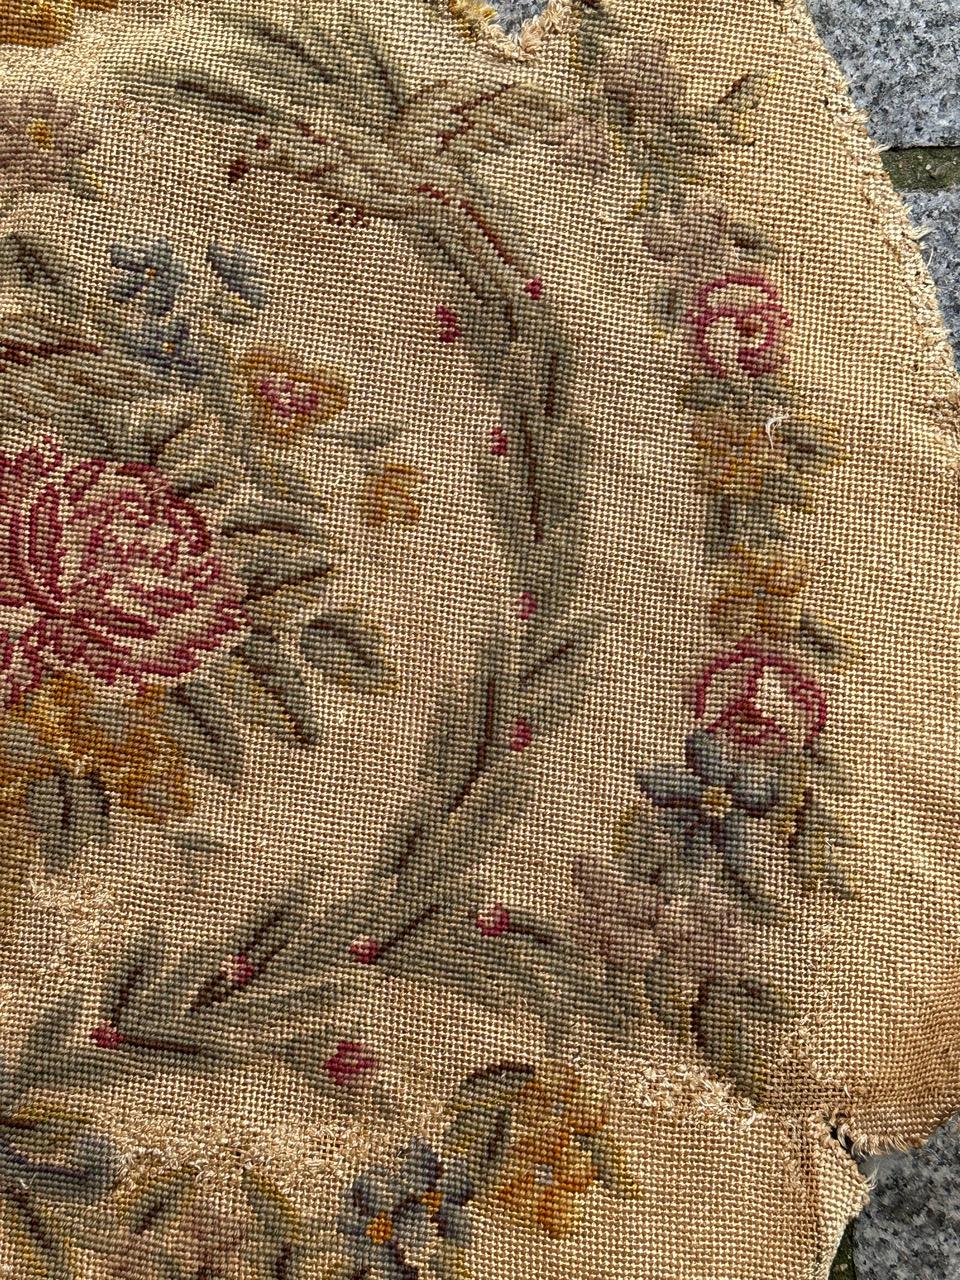 Aubusson Bobyrug’s pretty antique French needlepoint chair cover tapestry  For Sale